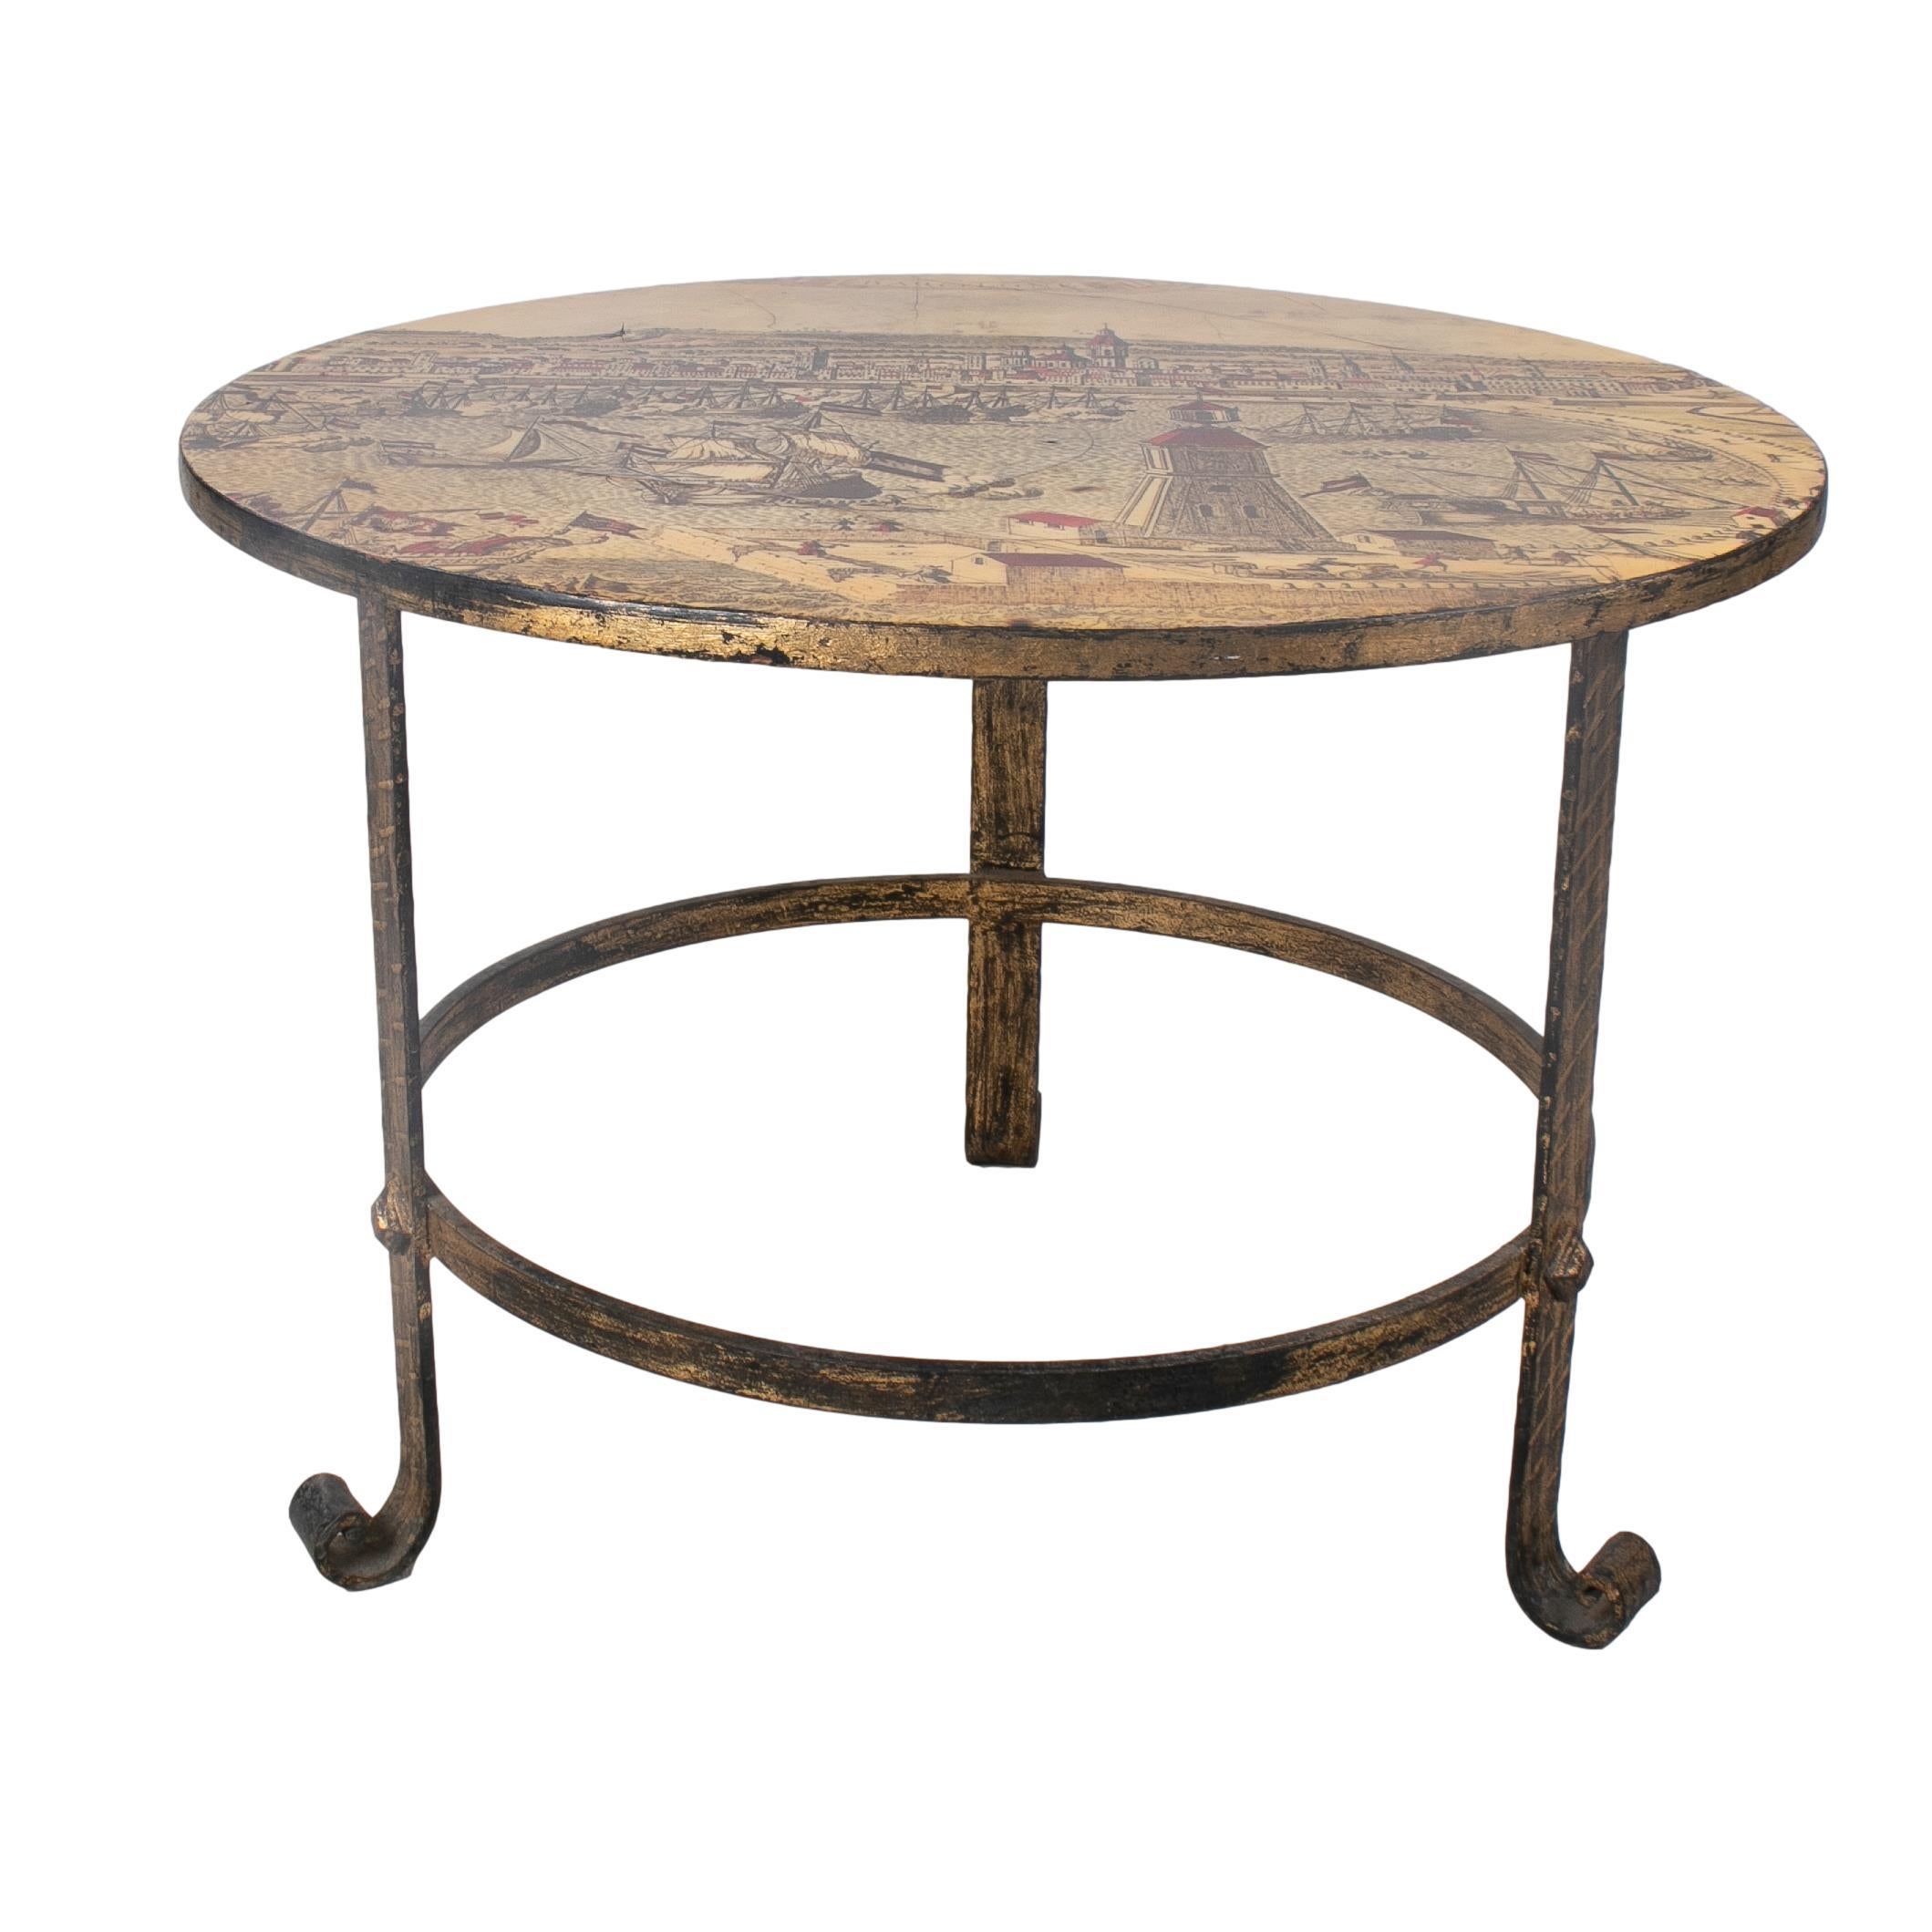 1950s Spanish iron round table with medieval port scene.